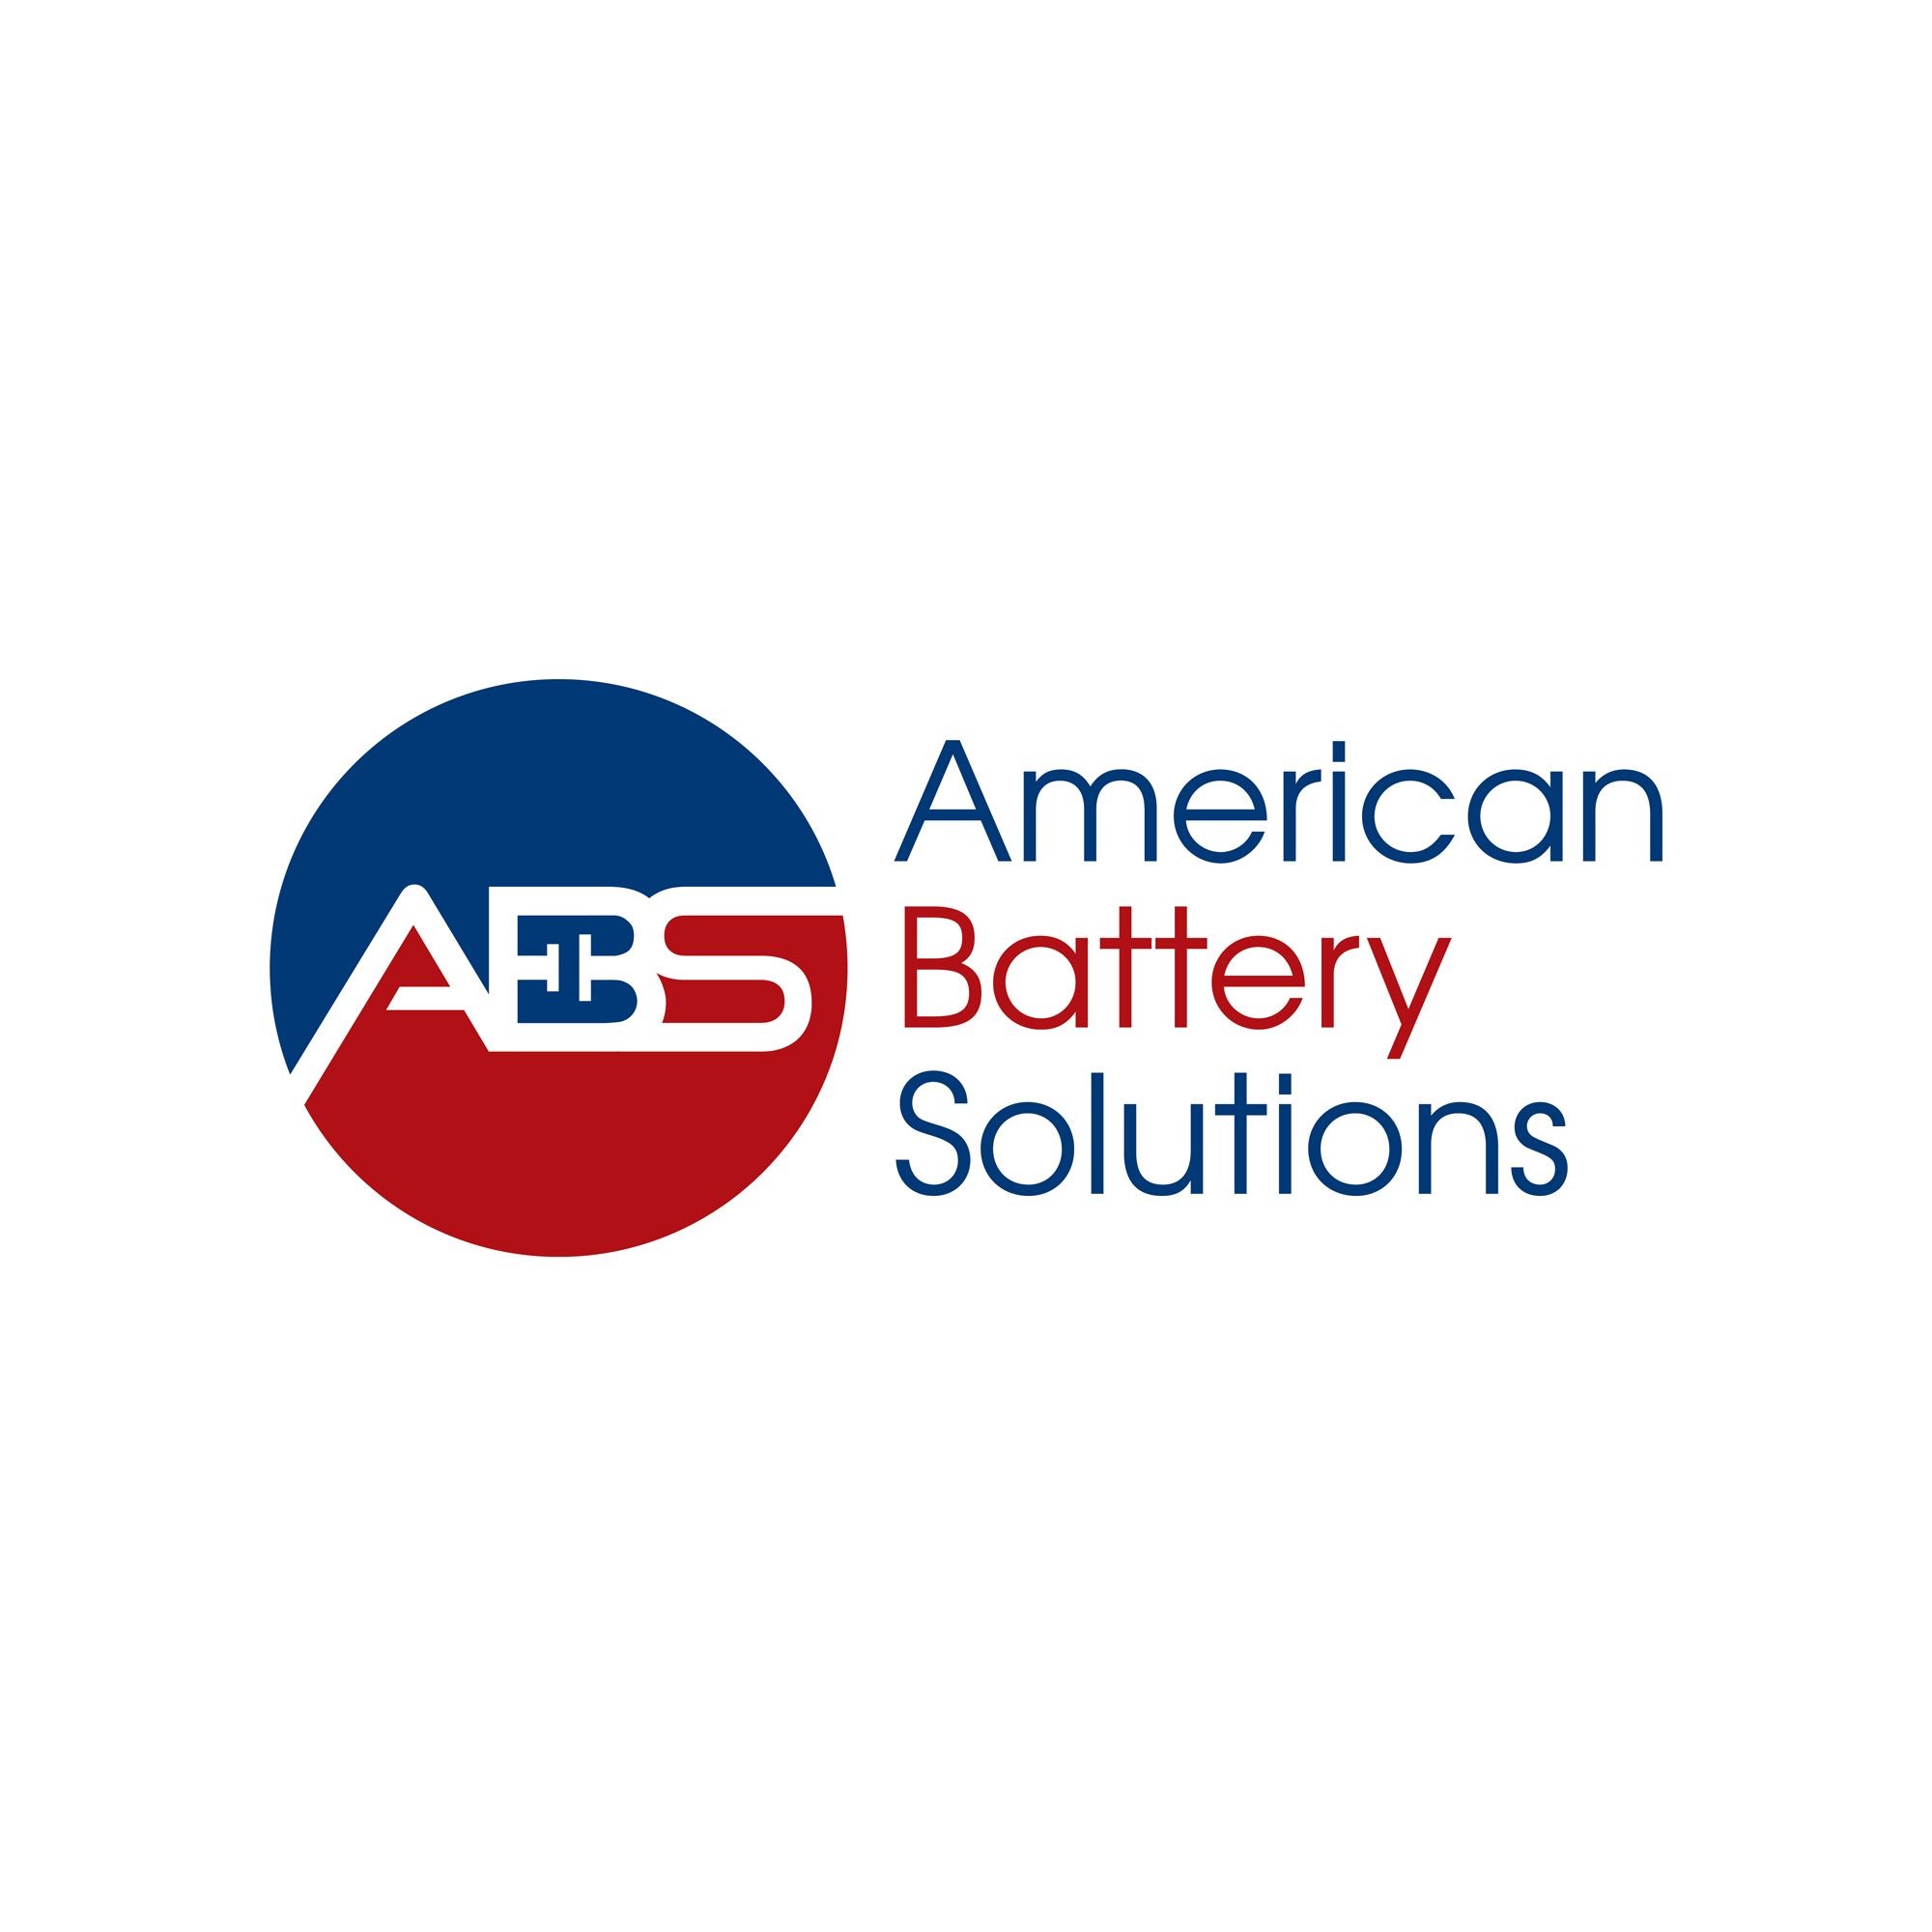 American Battery Solutions